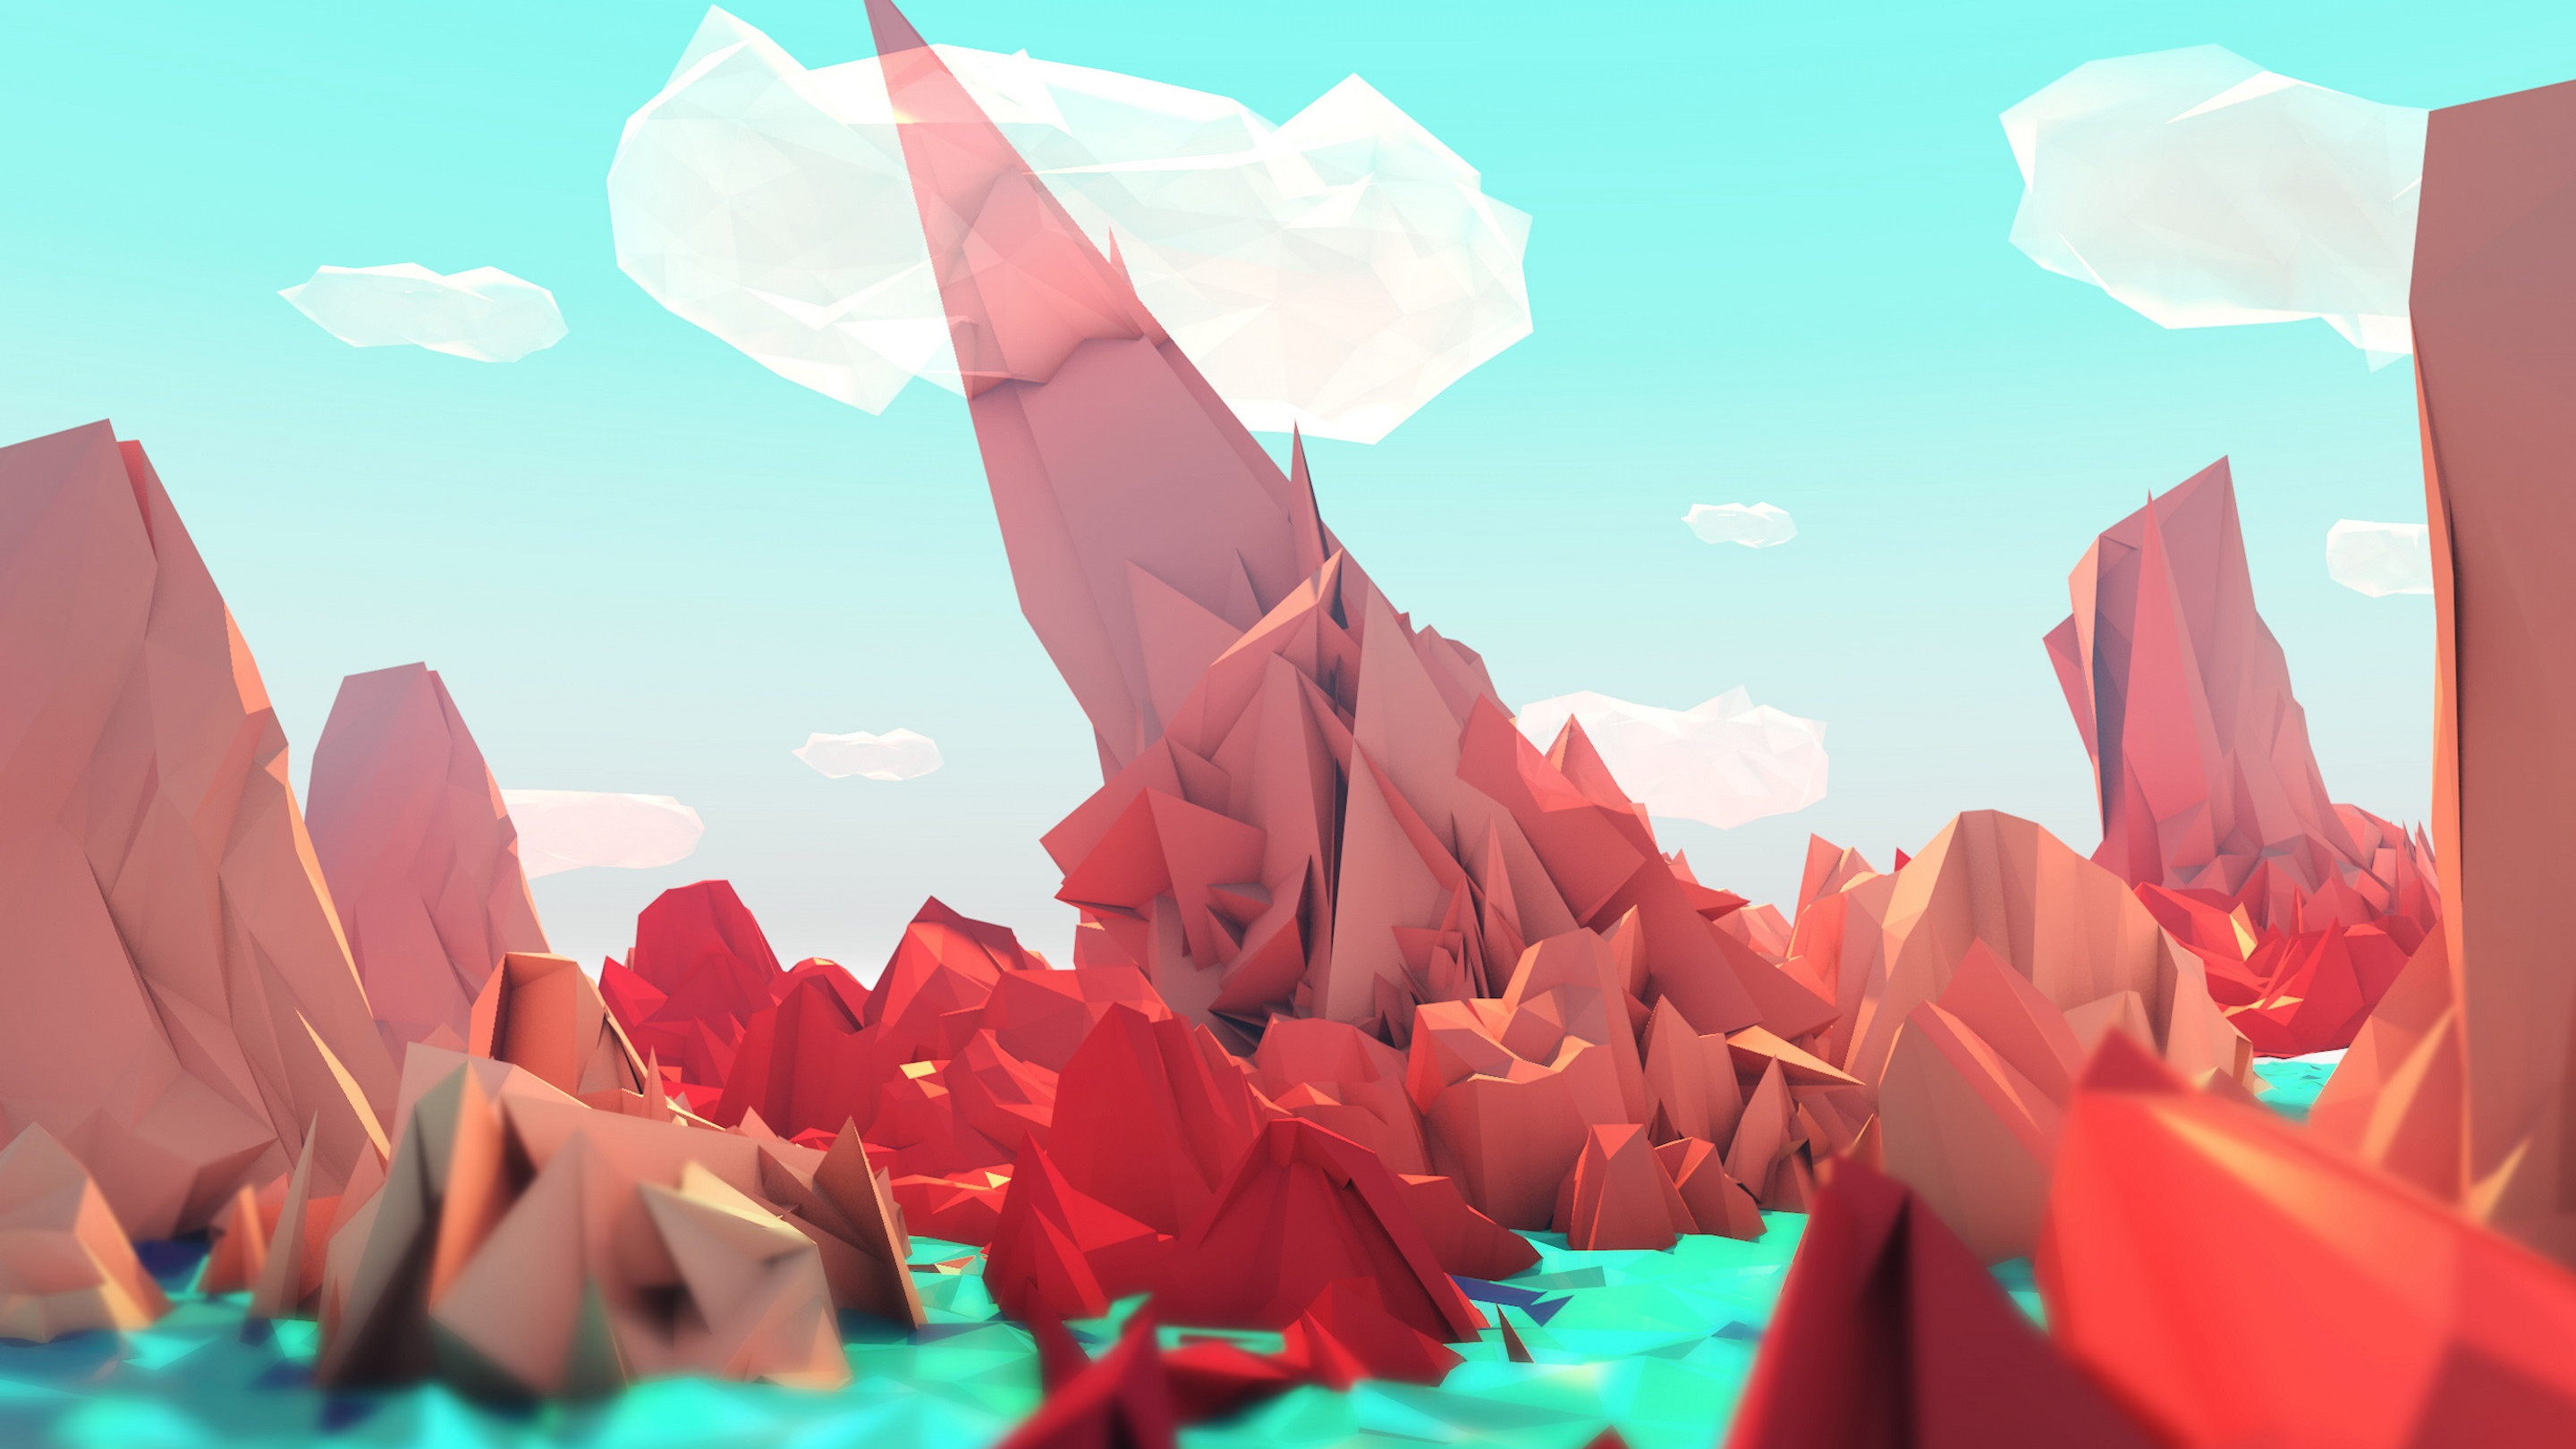 The red mountains. Low poly illustration wallpaper 2880x1620